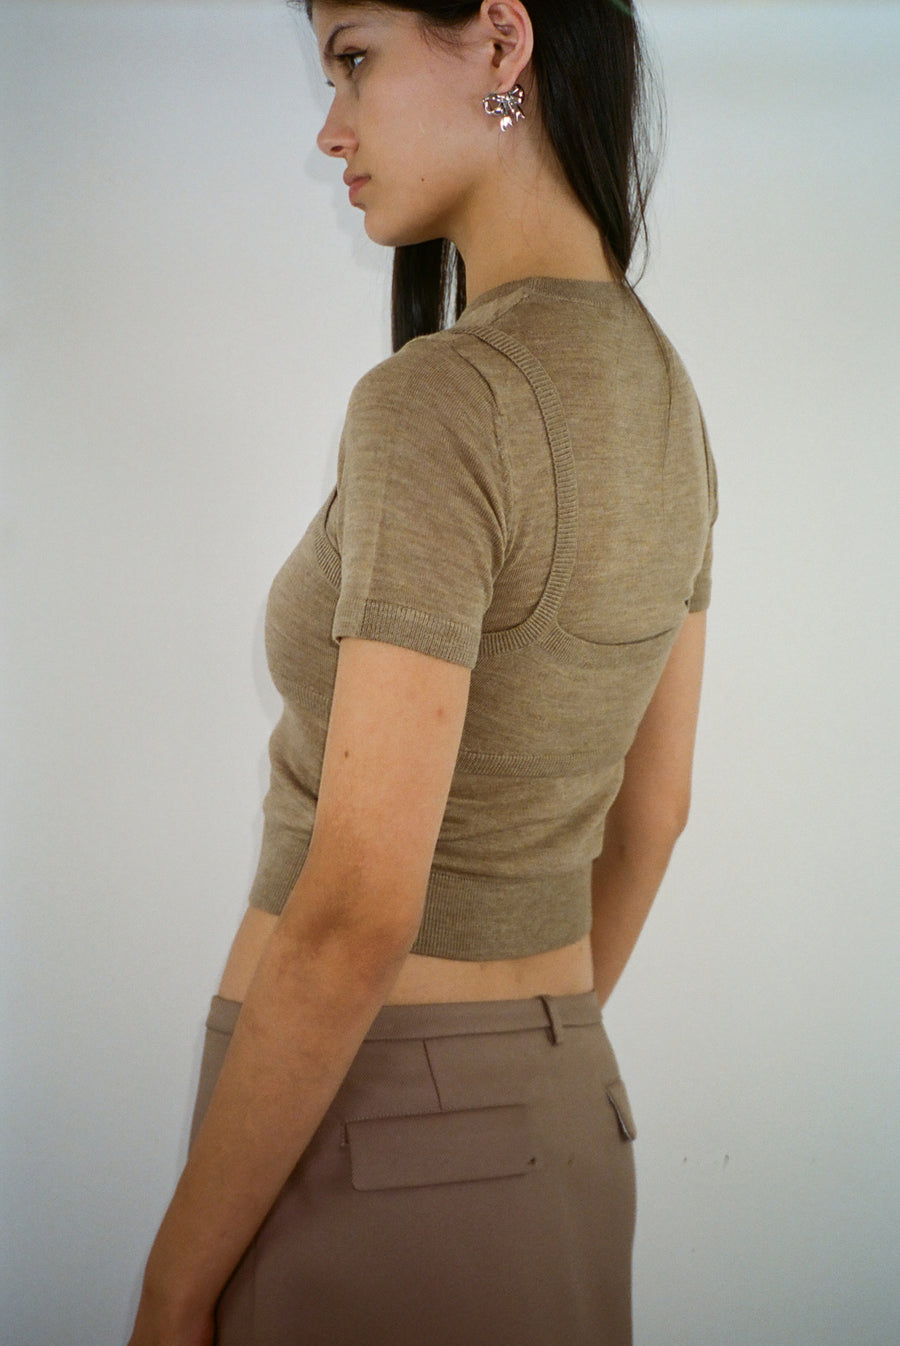 Short sleeve sweater in peanut with built in layered bra on model